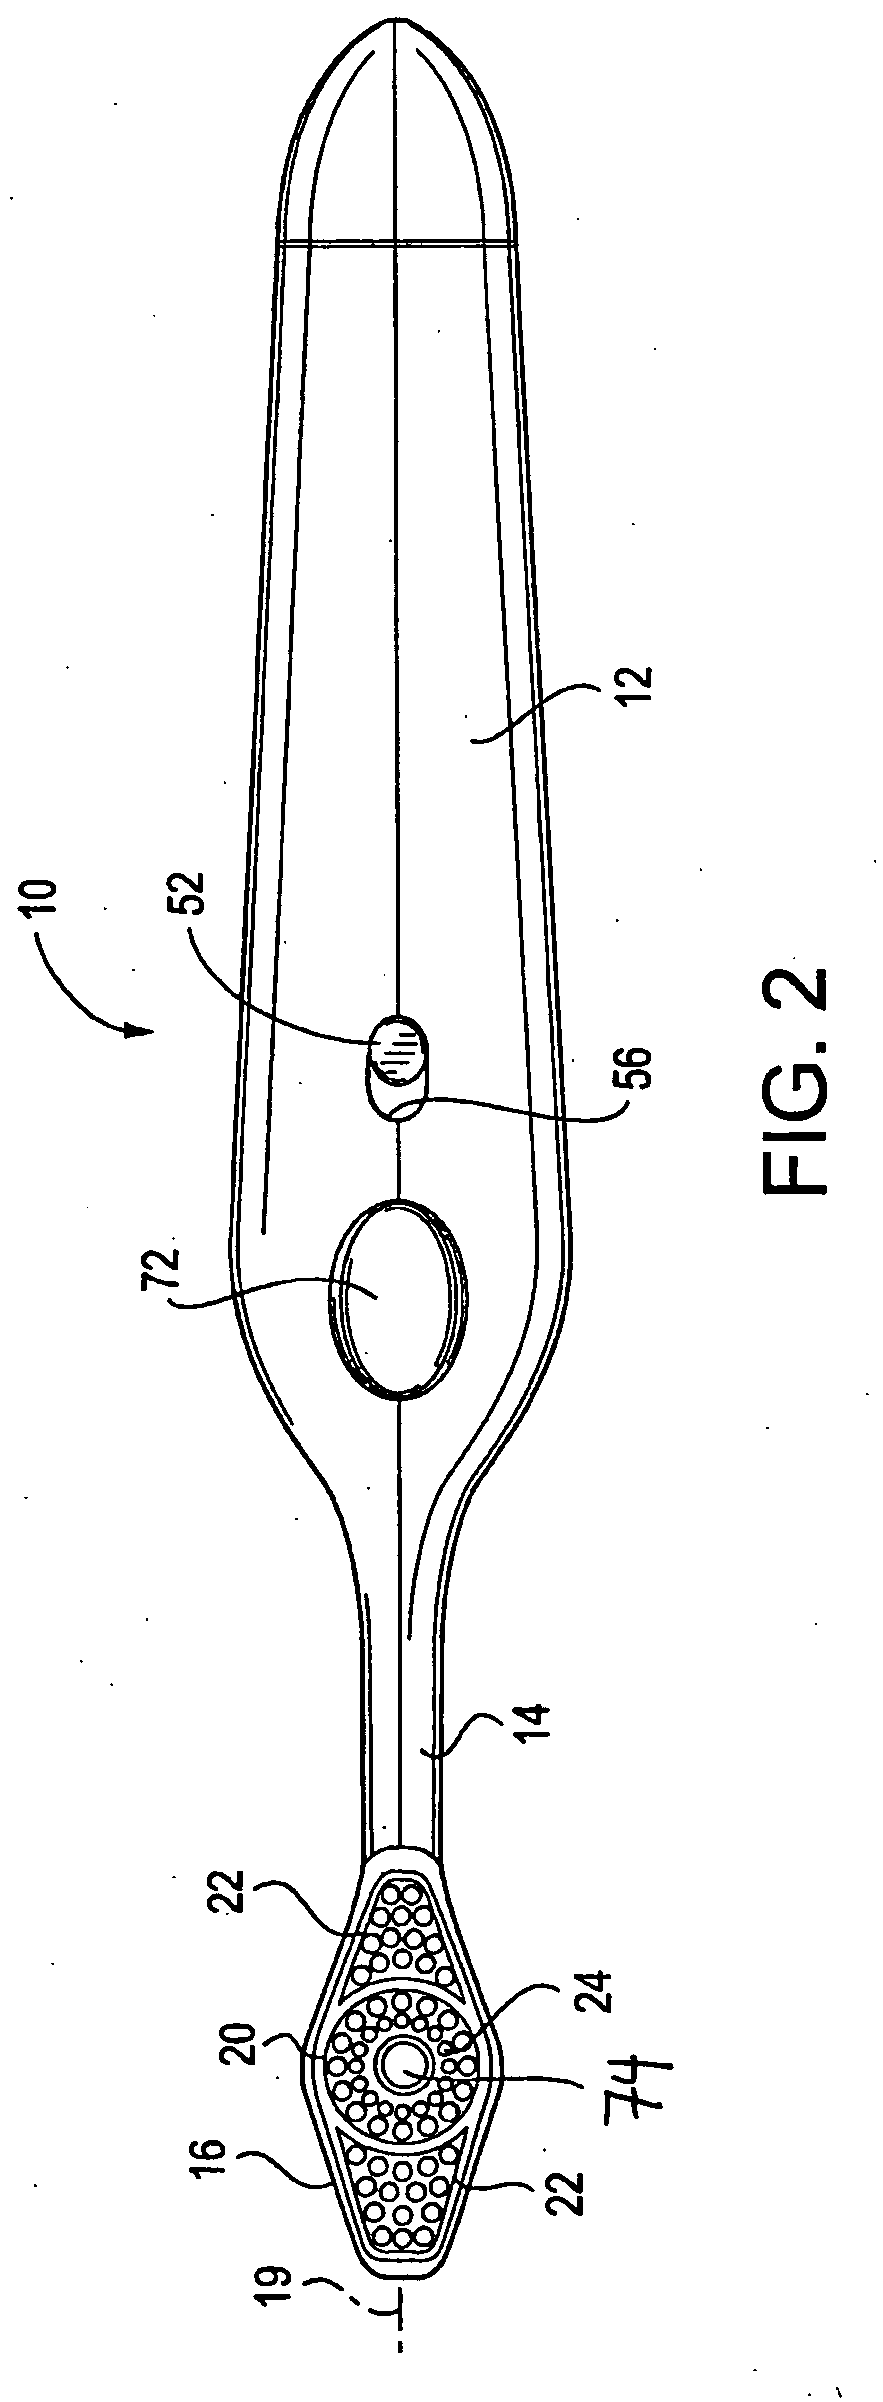 Electric toothbrush comprising an electrically powered element